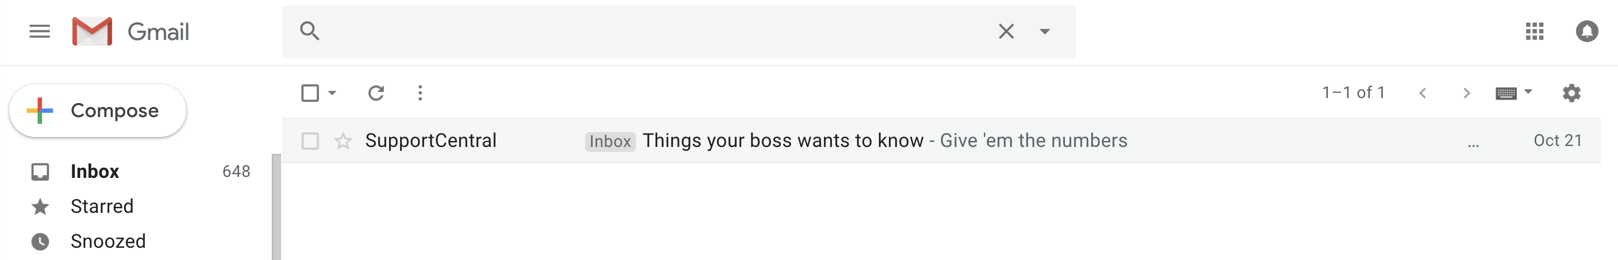 A Gmail inbox with one message with the subject line Things your boss wants you to know and Preview Text Give 'em the numbers